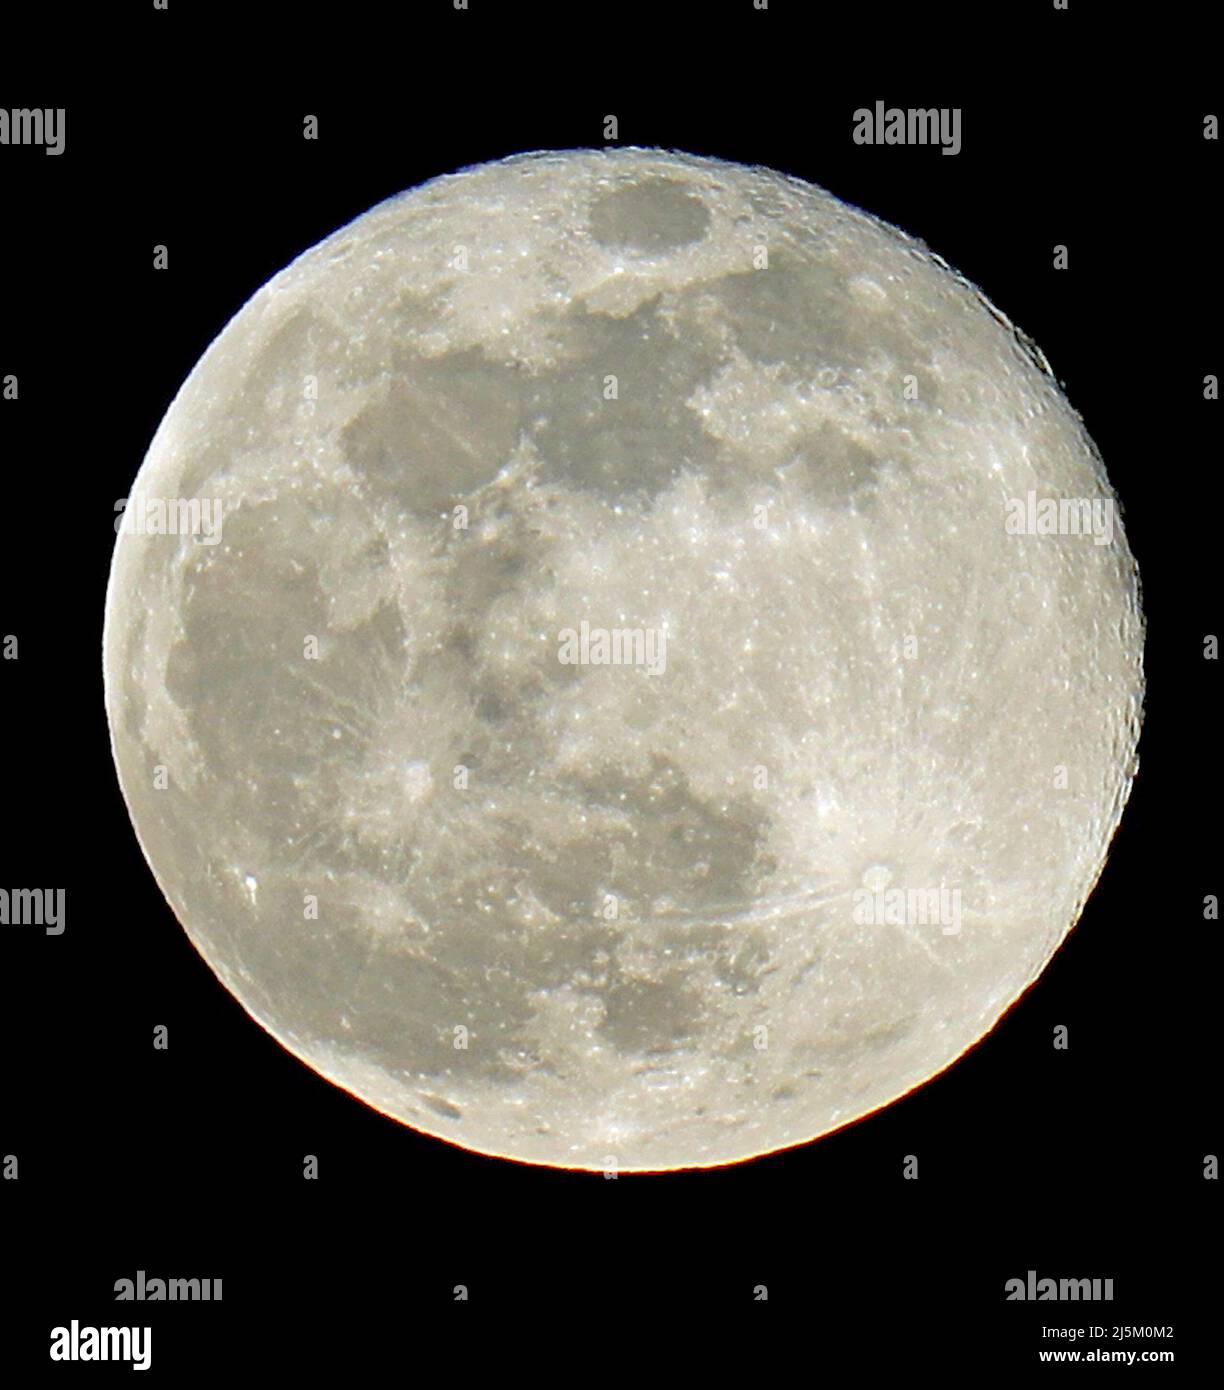 Immense moon during the full moon phase and the lunar craters clearly visible in the black sky Stock Photo